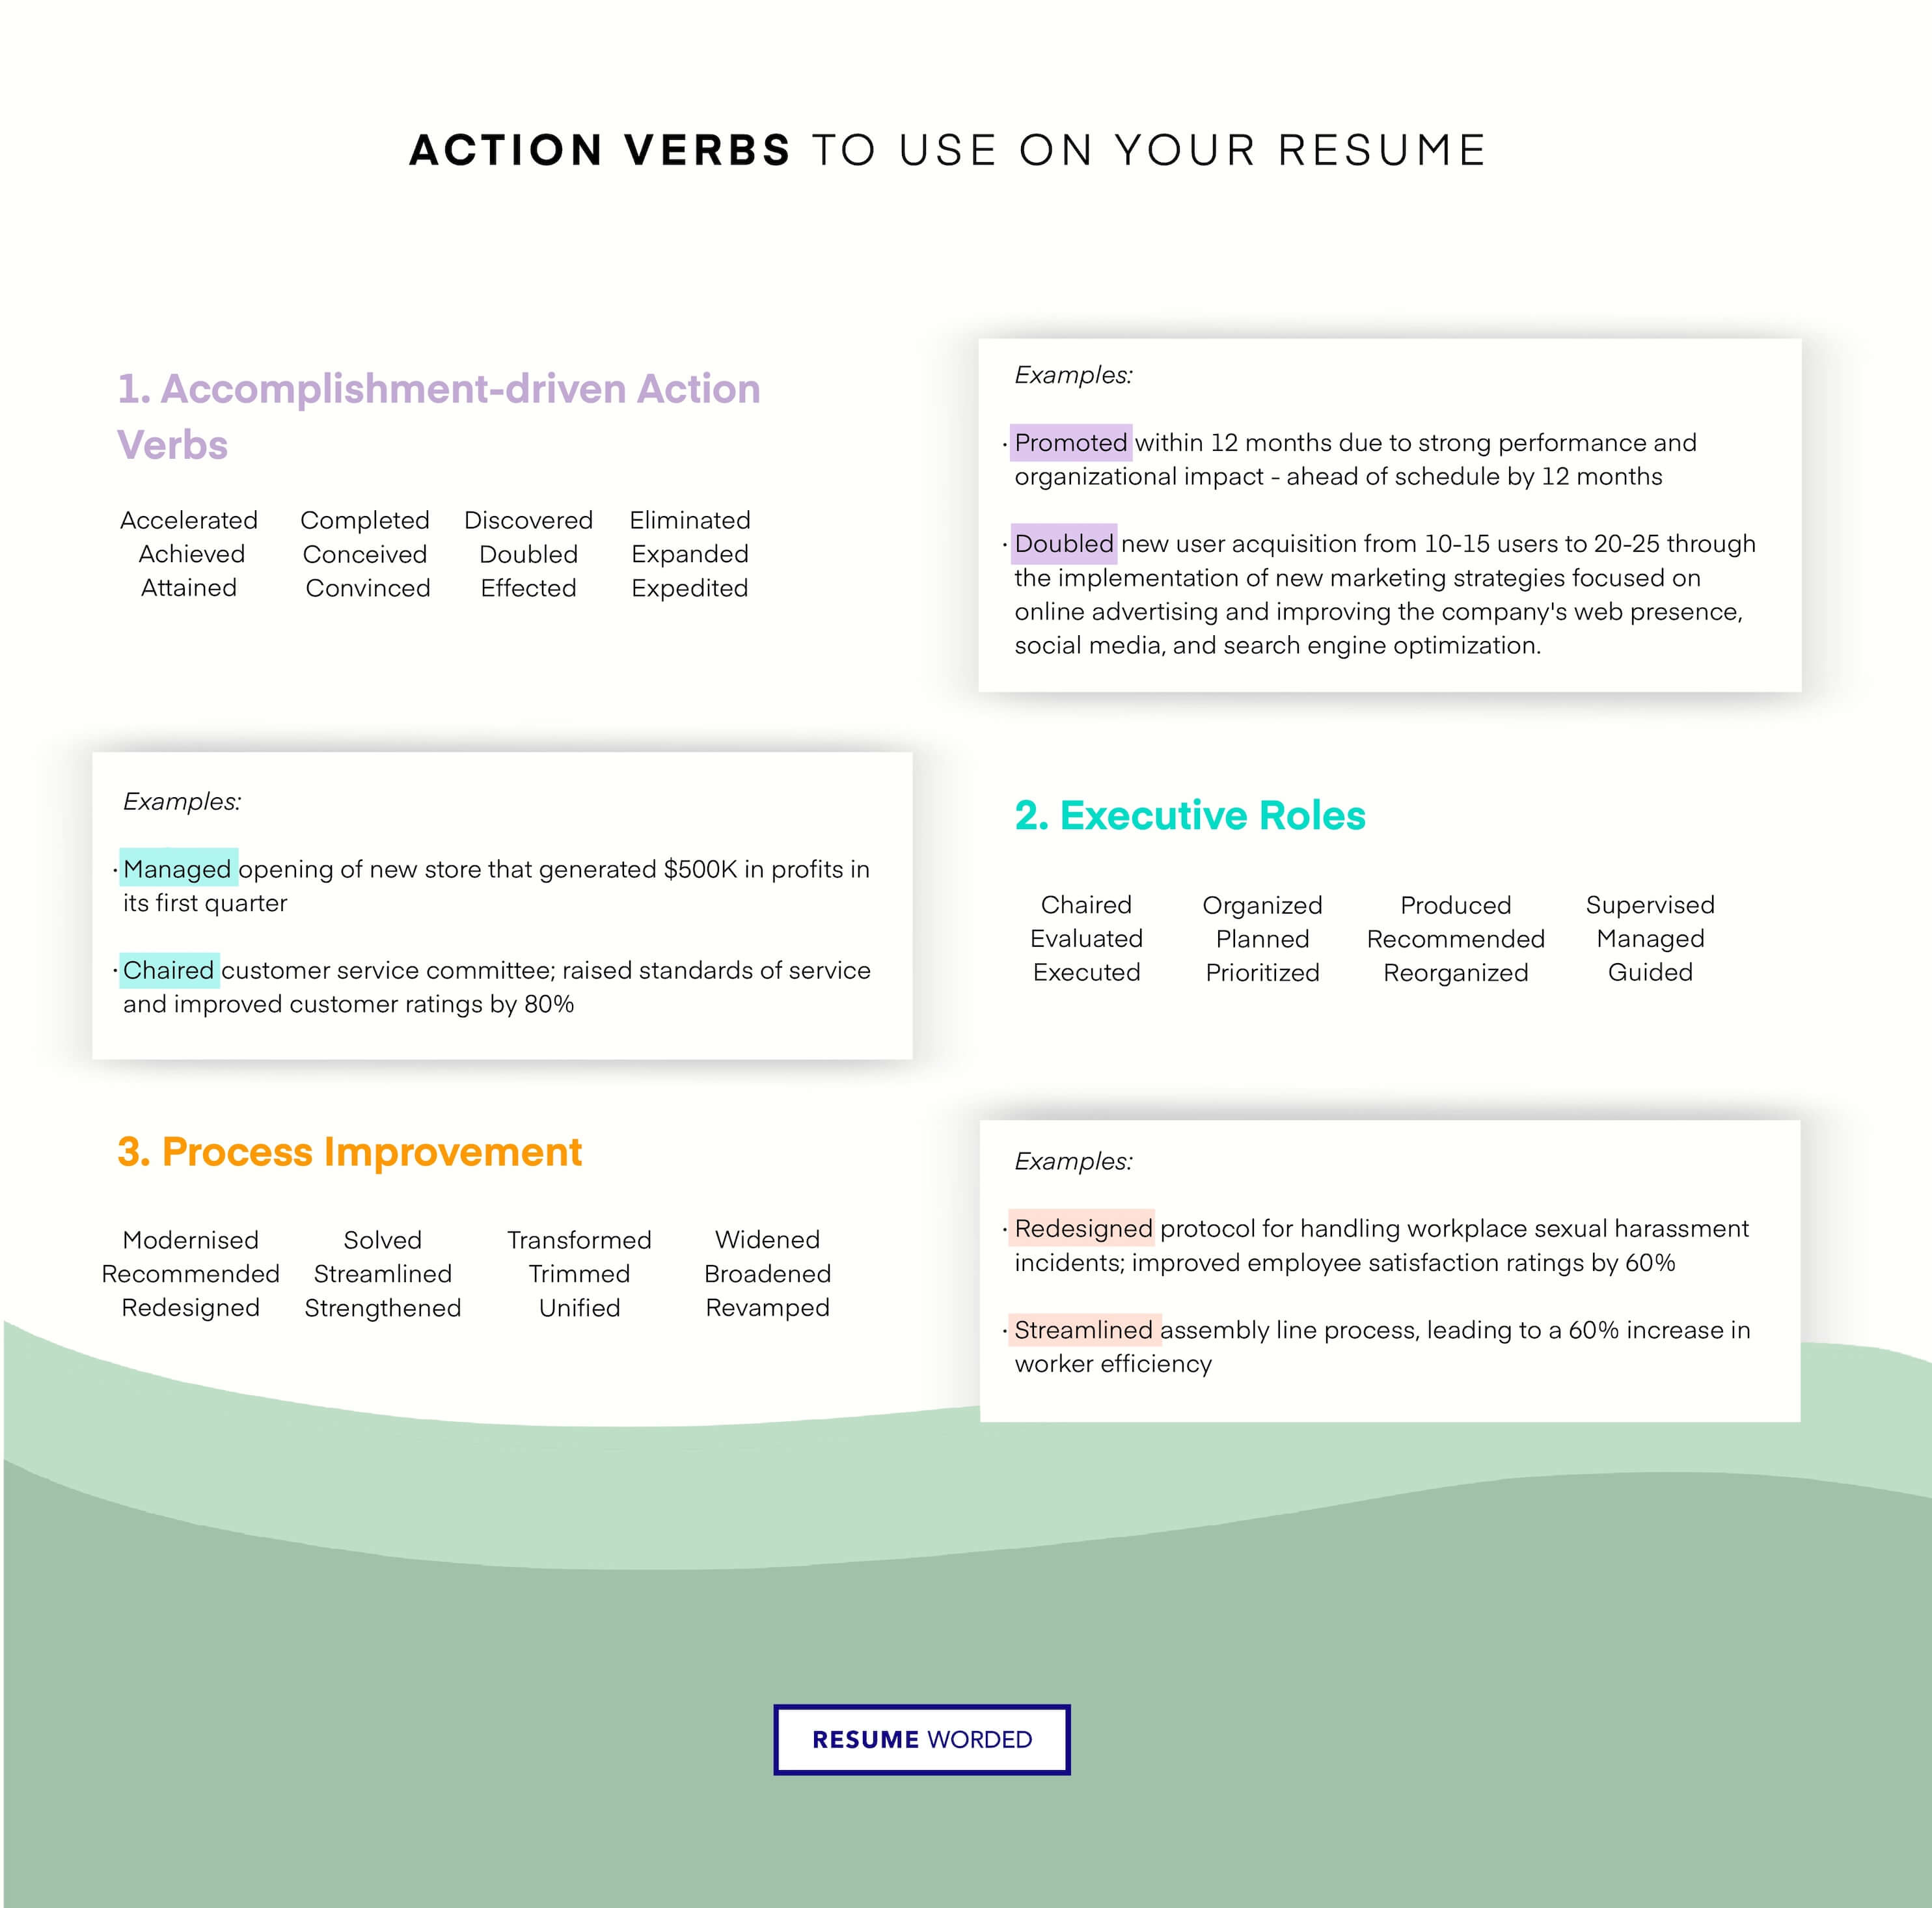 Use strong action verbs and numbers in your bullet points